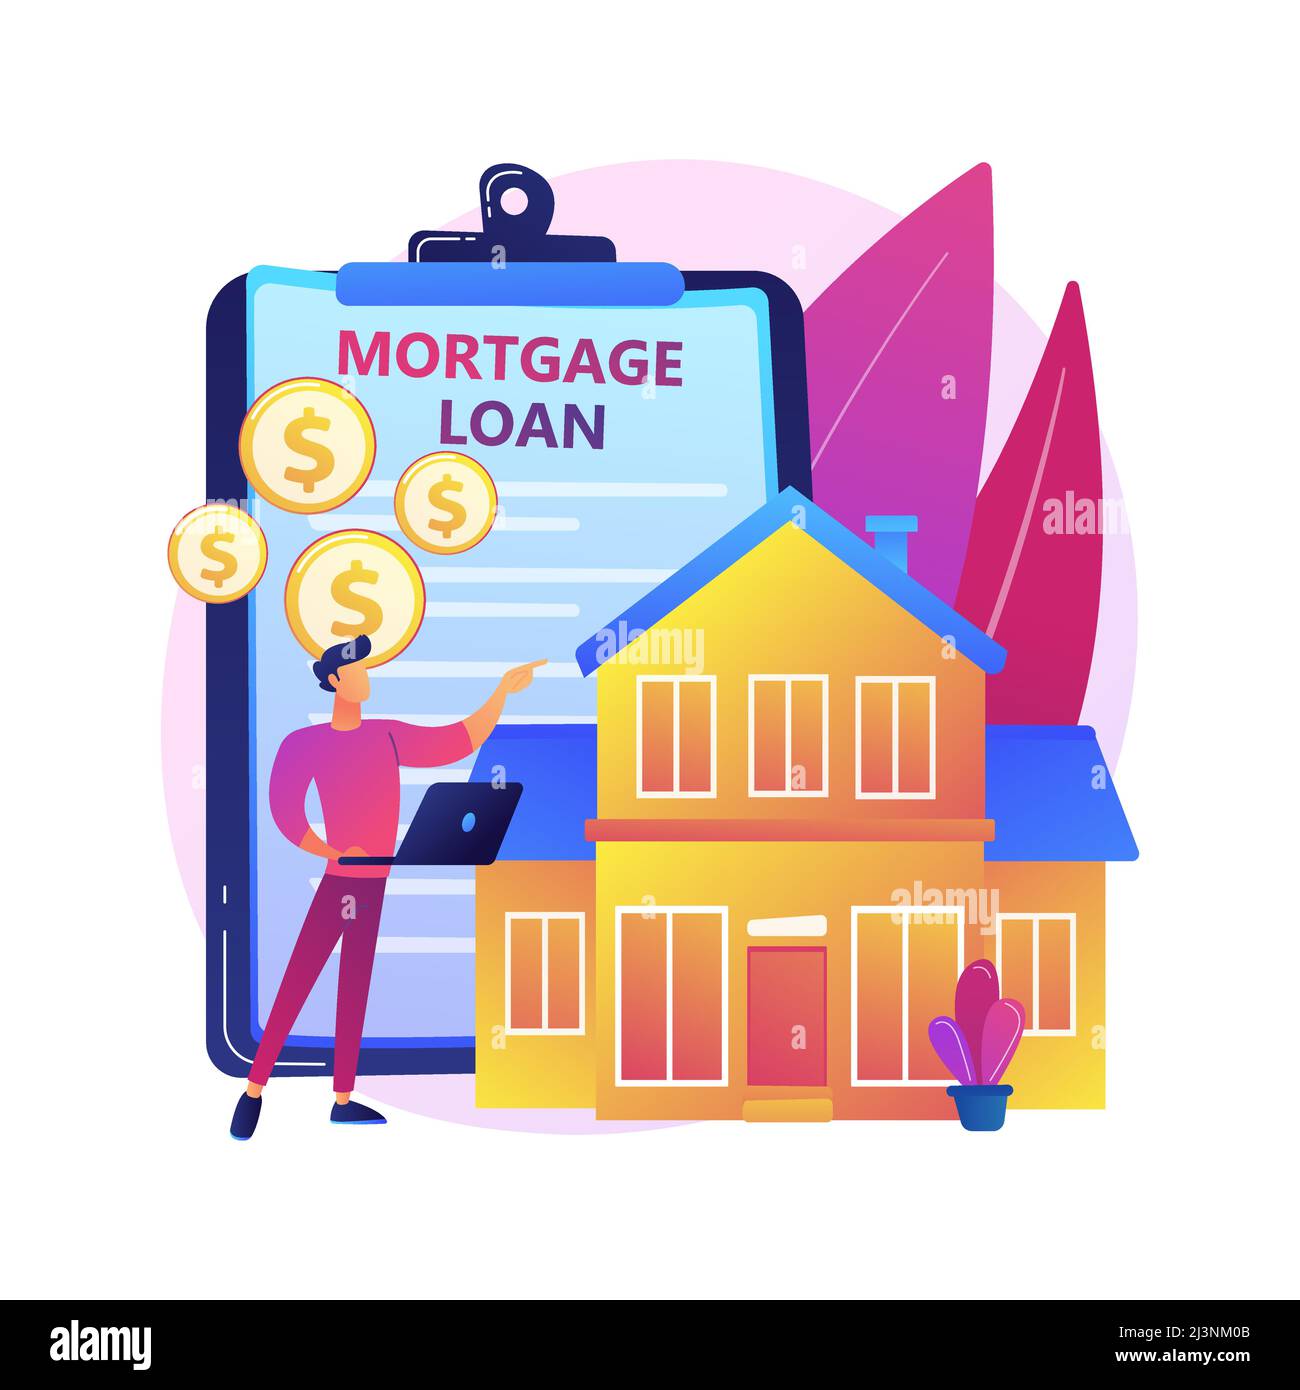 Mortgage loan abstract concept vector illustration. Home bank credit, down payment, real estate services, house loan pay off, investment portfolio, fa Stock Vector